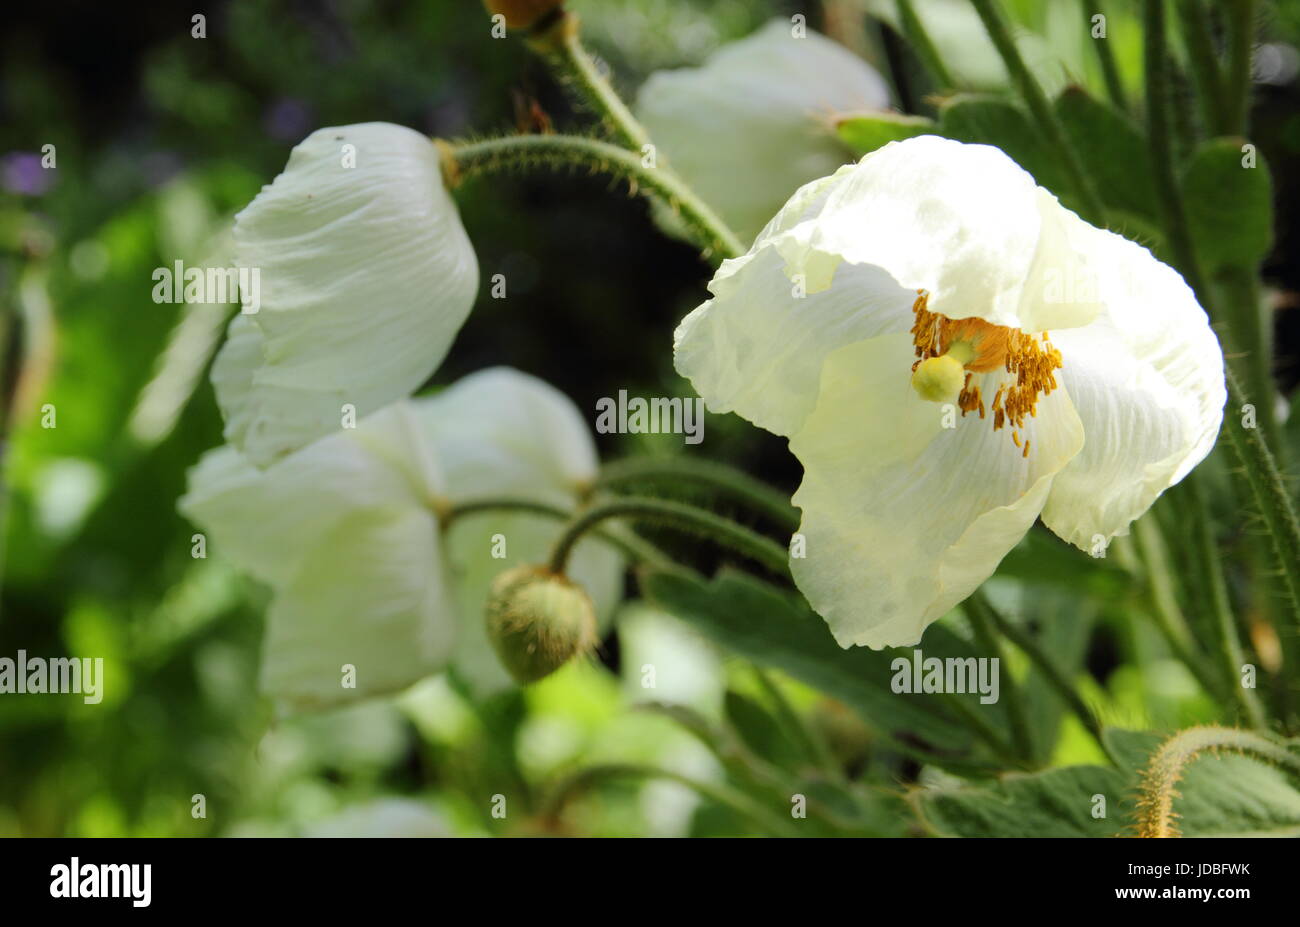 Meconopsis napaulensis (also listed as satin poppy, yellow poppy, Nepal poppy, Himalayan poppy),  flowering in a shady spot in an English garden -June Stock Photo